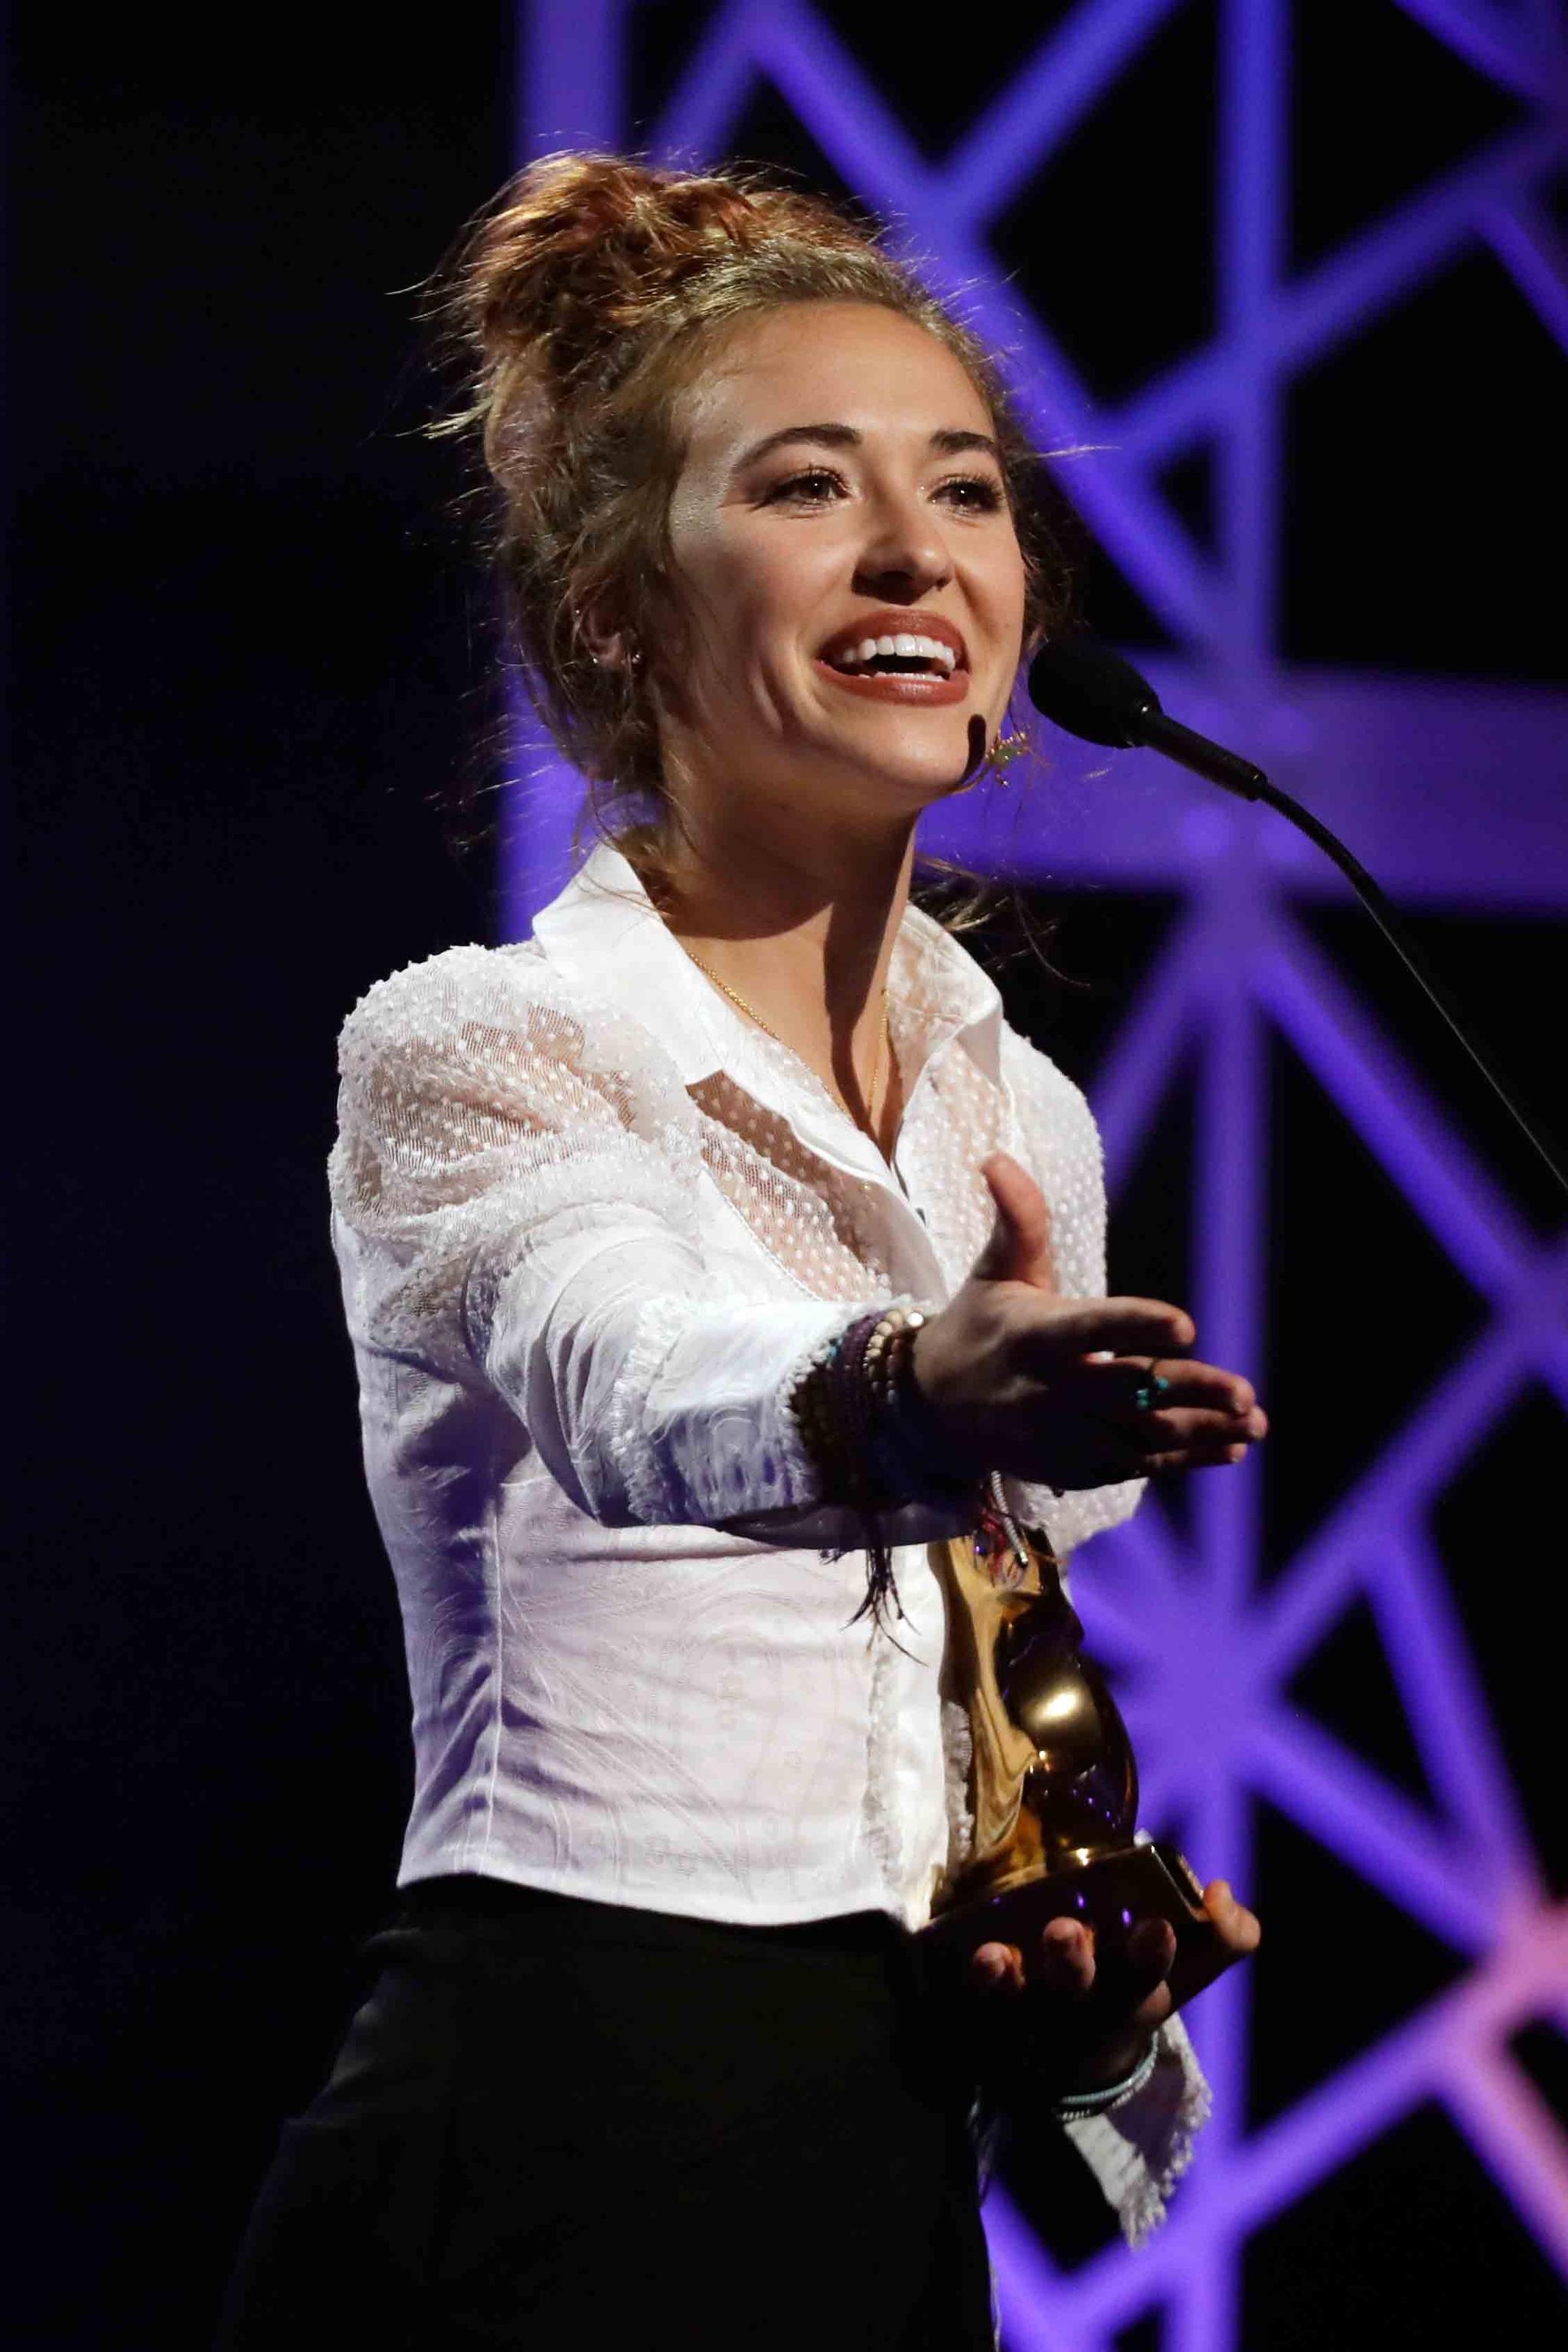 Lauren Daigle accepts the artist of the year award during the Dove Awards on Tuesday, Oct. 15, 2019